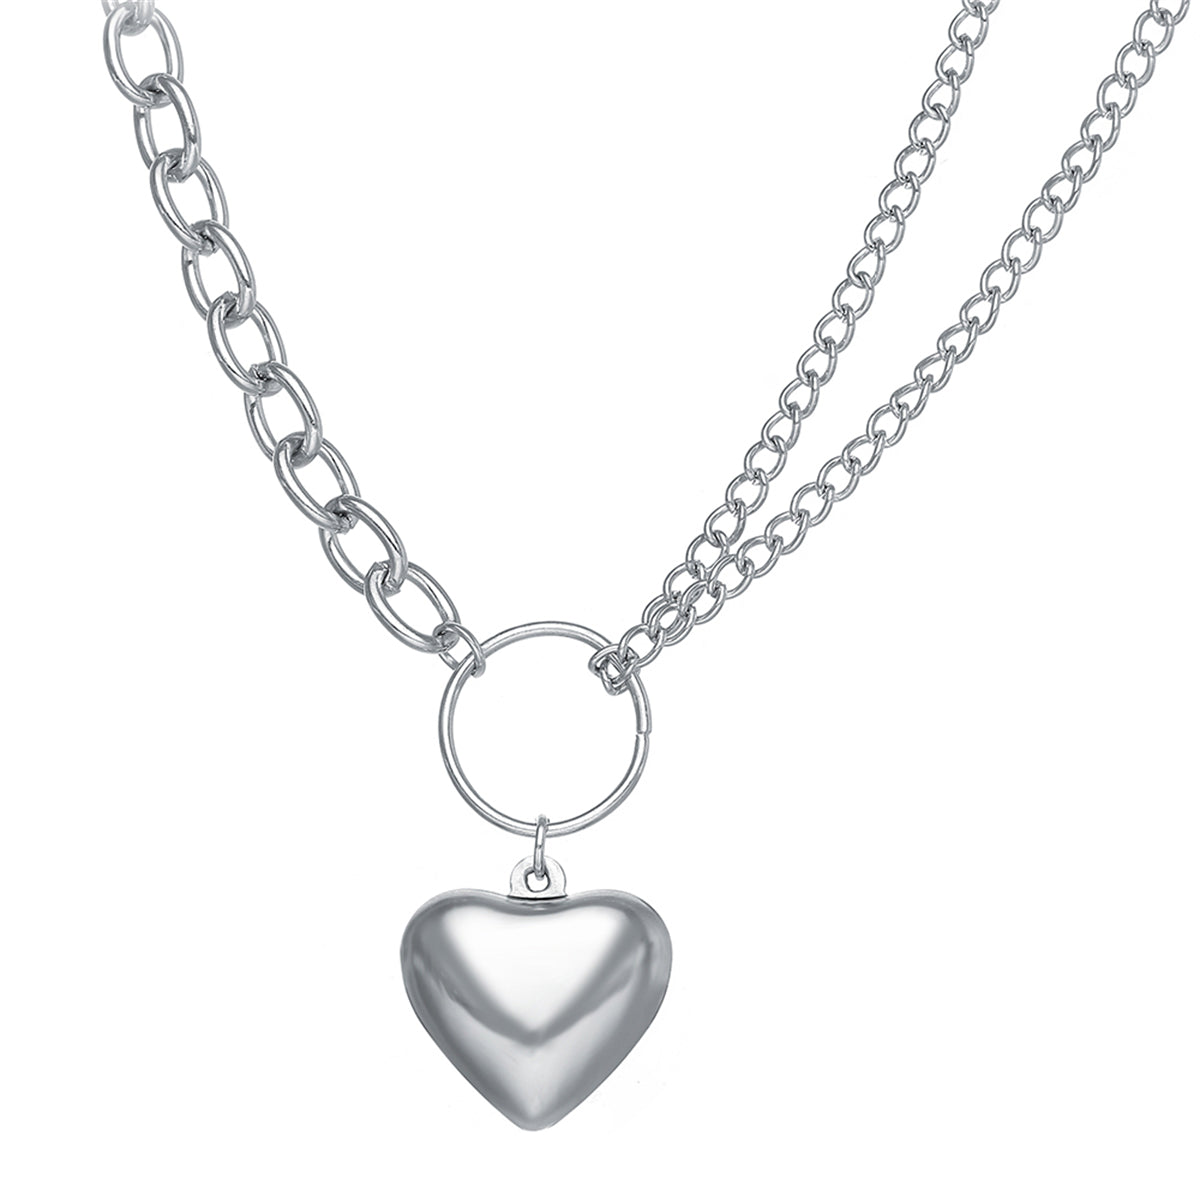 Silver-Plated Heart Layered Pendant Necklace